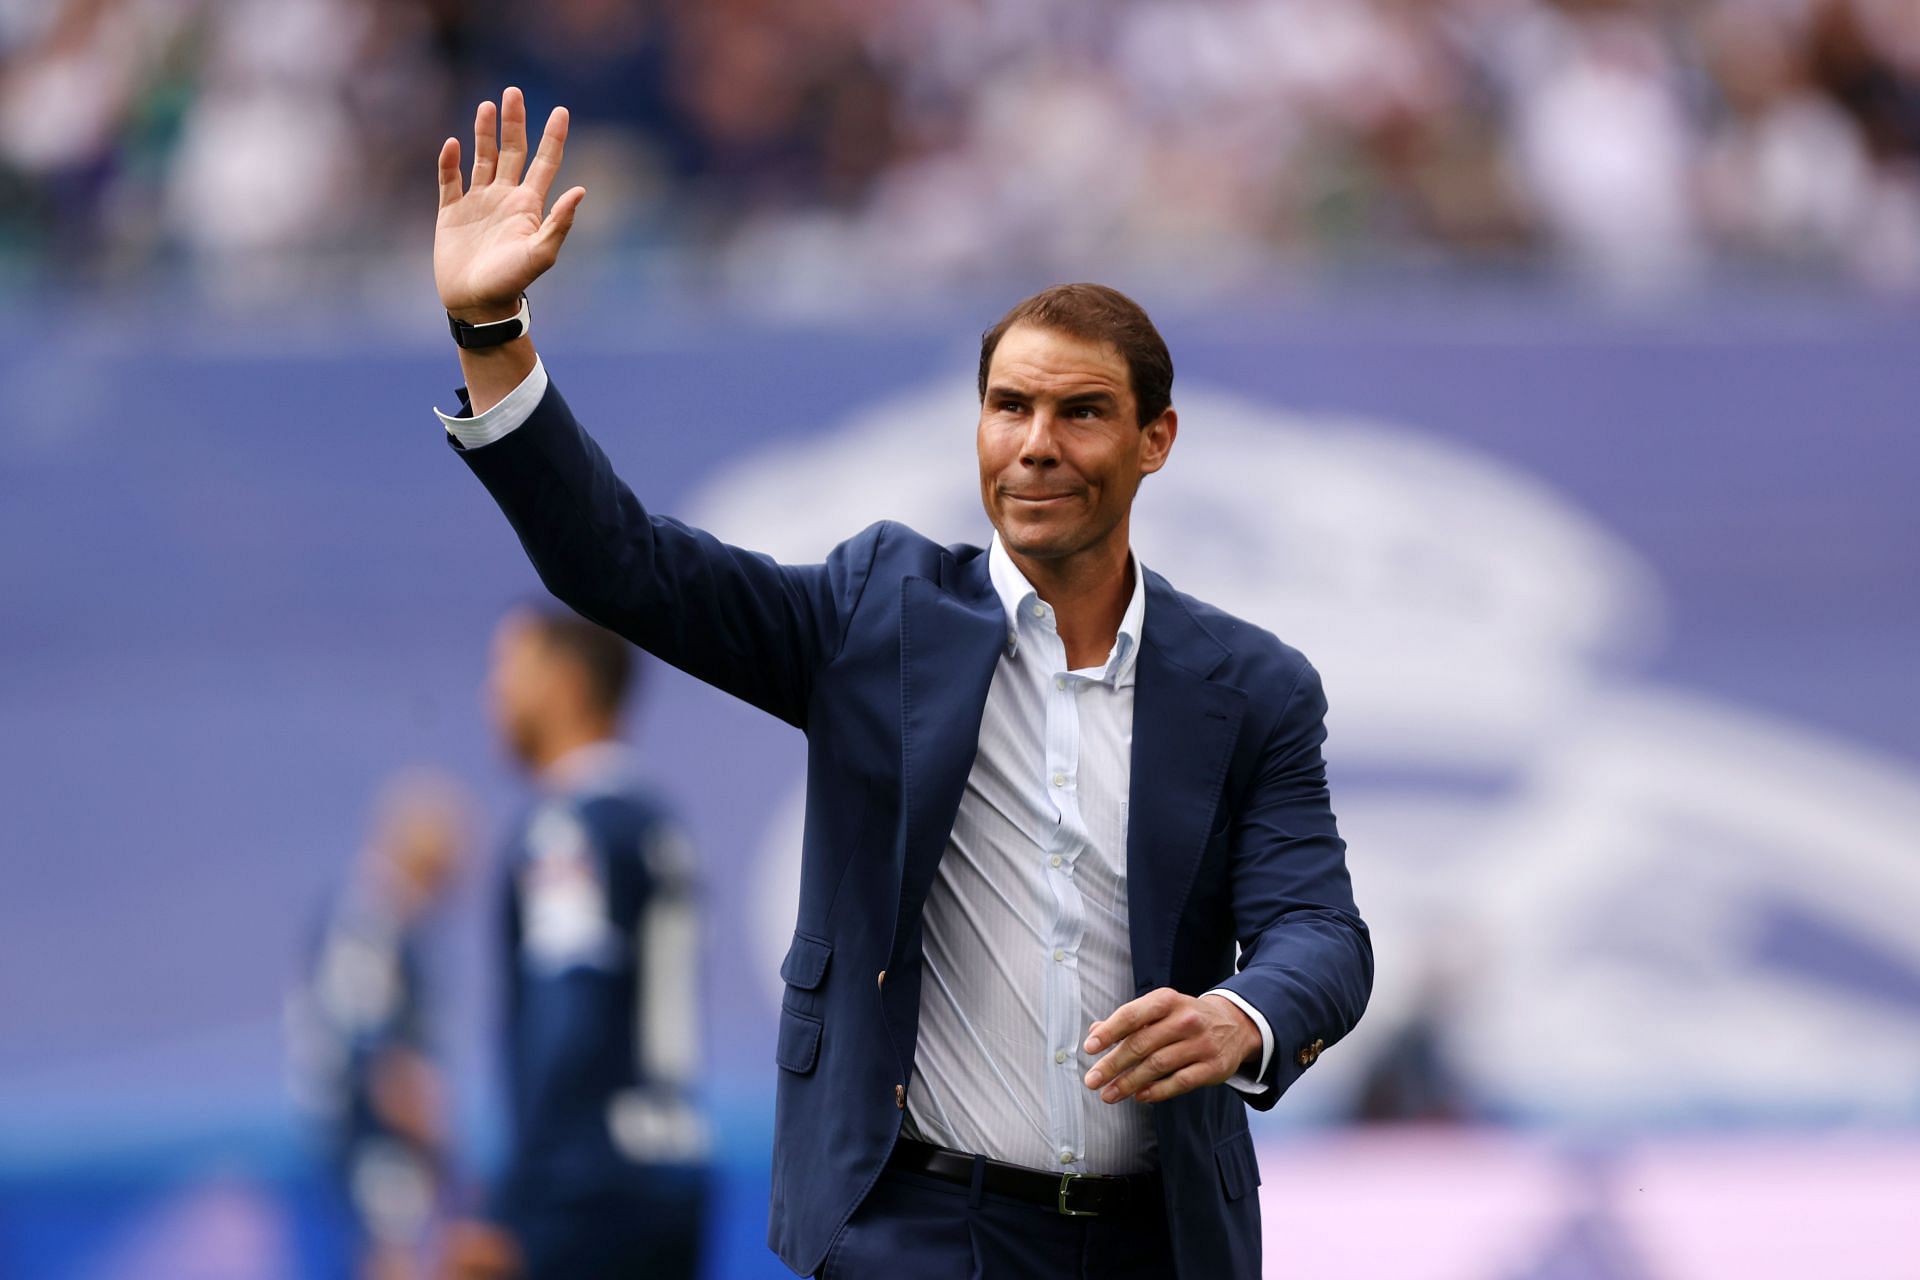 Rafael Nadal acknowledges the fans after taking the honorary kick-off prior to a Real Madrid CF match